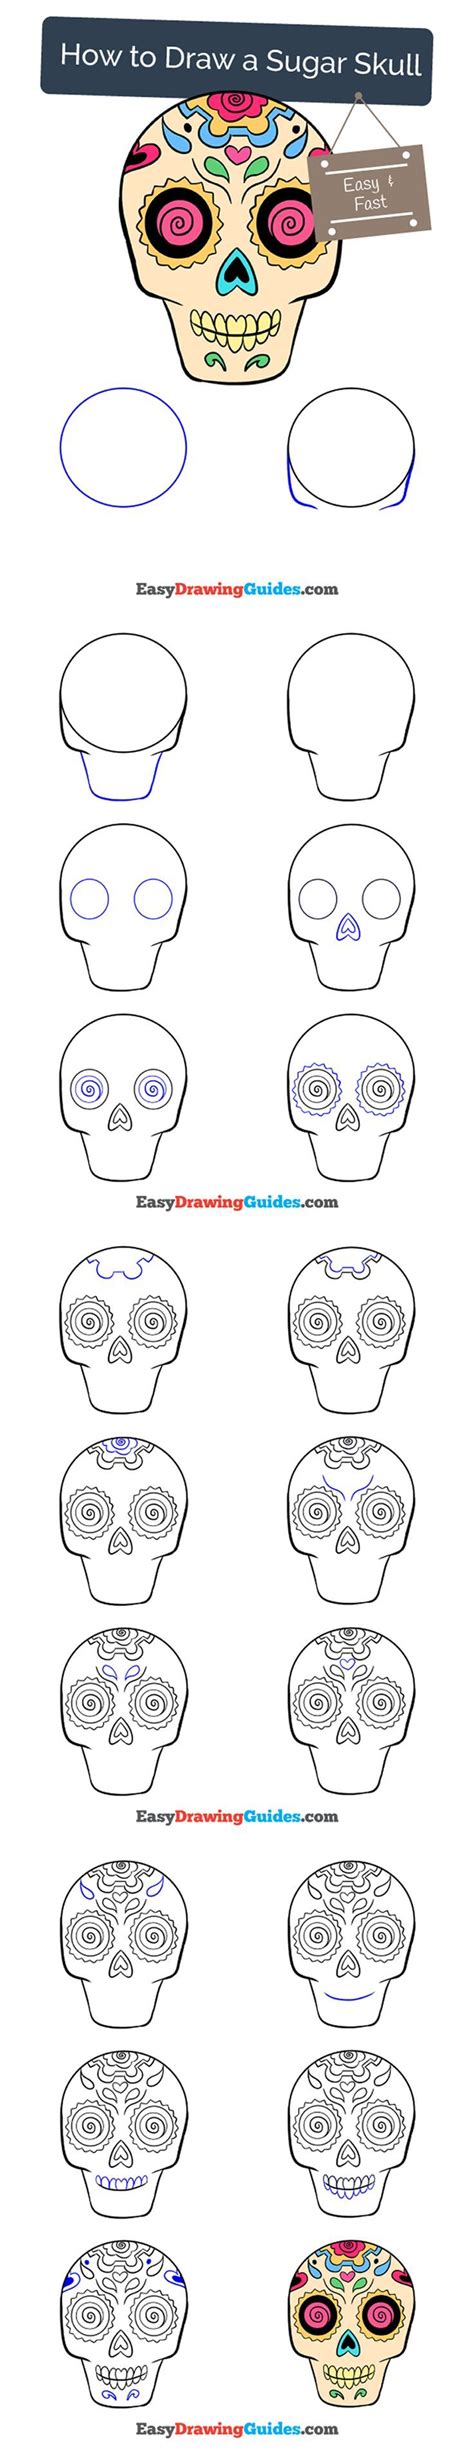 Https://wstravely.com/draw/how To Draw A Sugar Skull Easy For Beginners